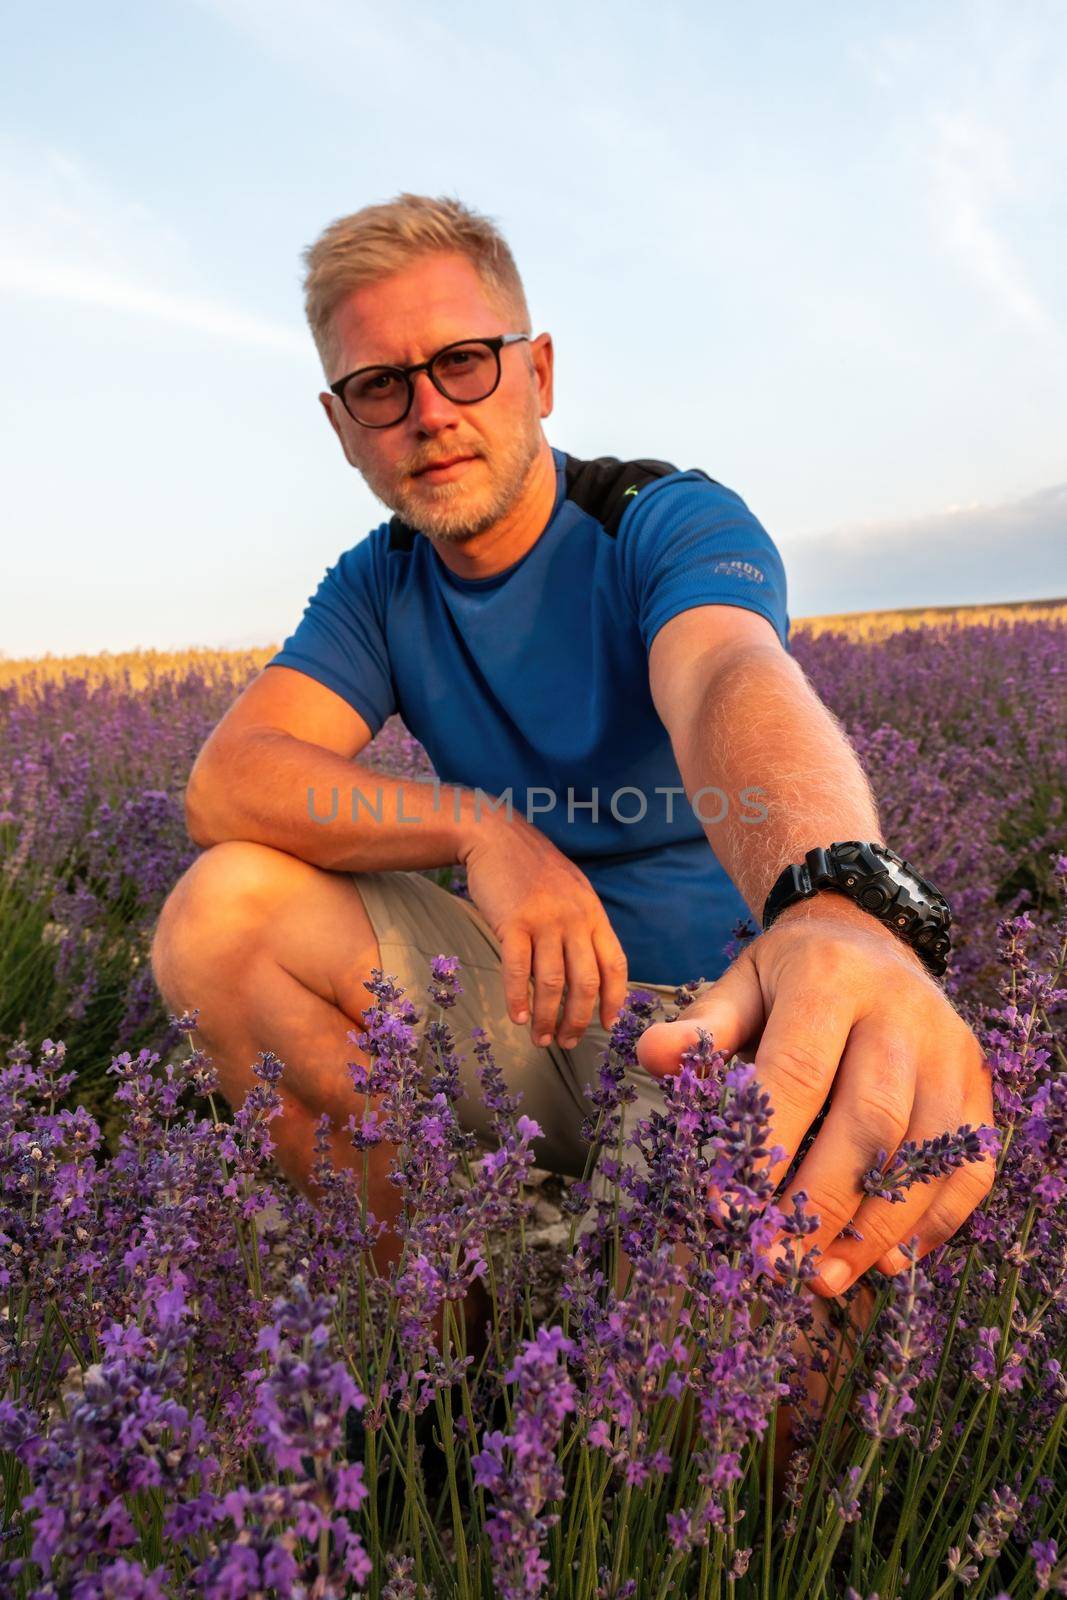 Close up portrait of happy young man in blue t-shirt and glasses on blooming lavender fields with endless rows. Warm sunset light. Bushes of lavender purple aromatic flowers on lavender fields by panophotograph